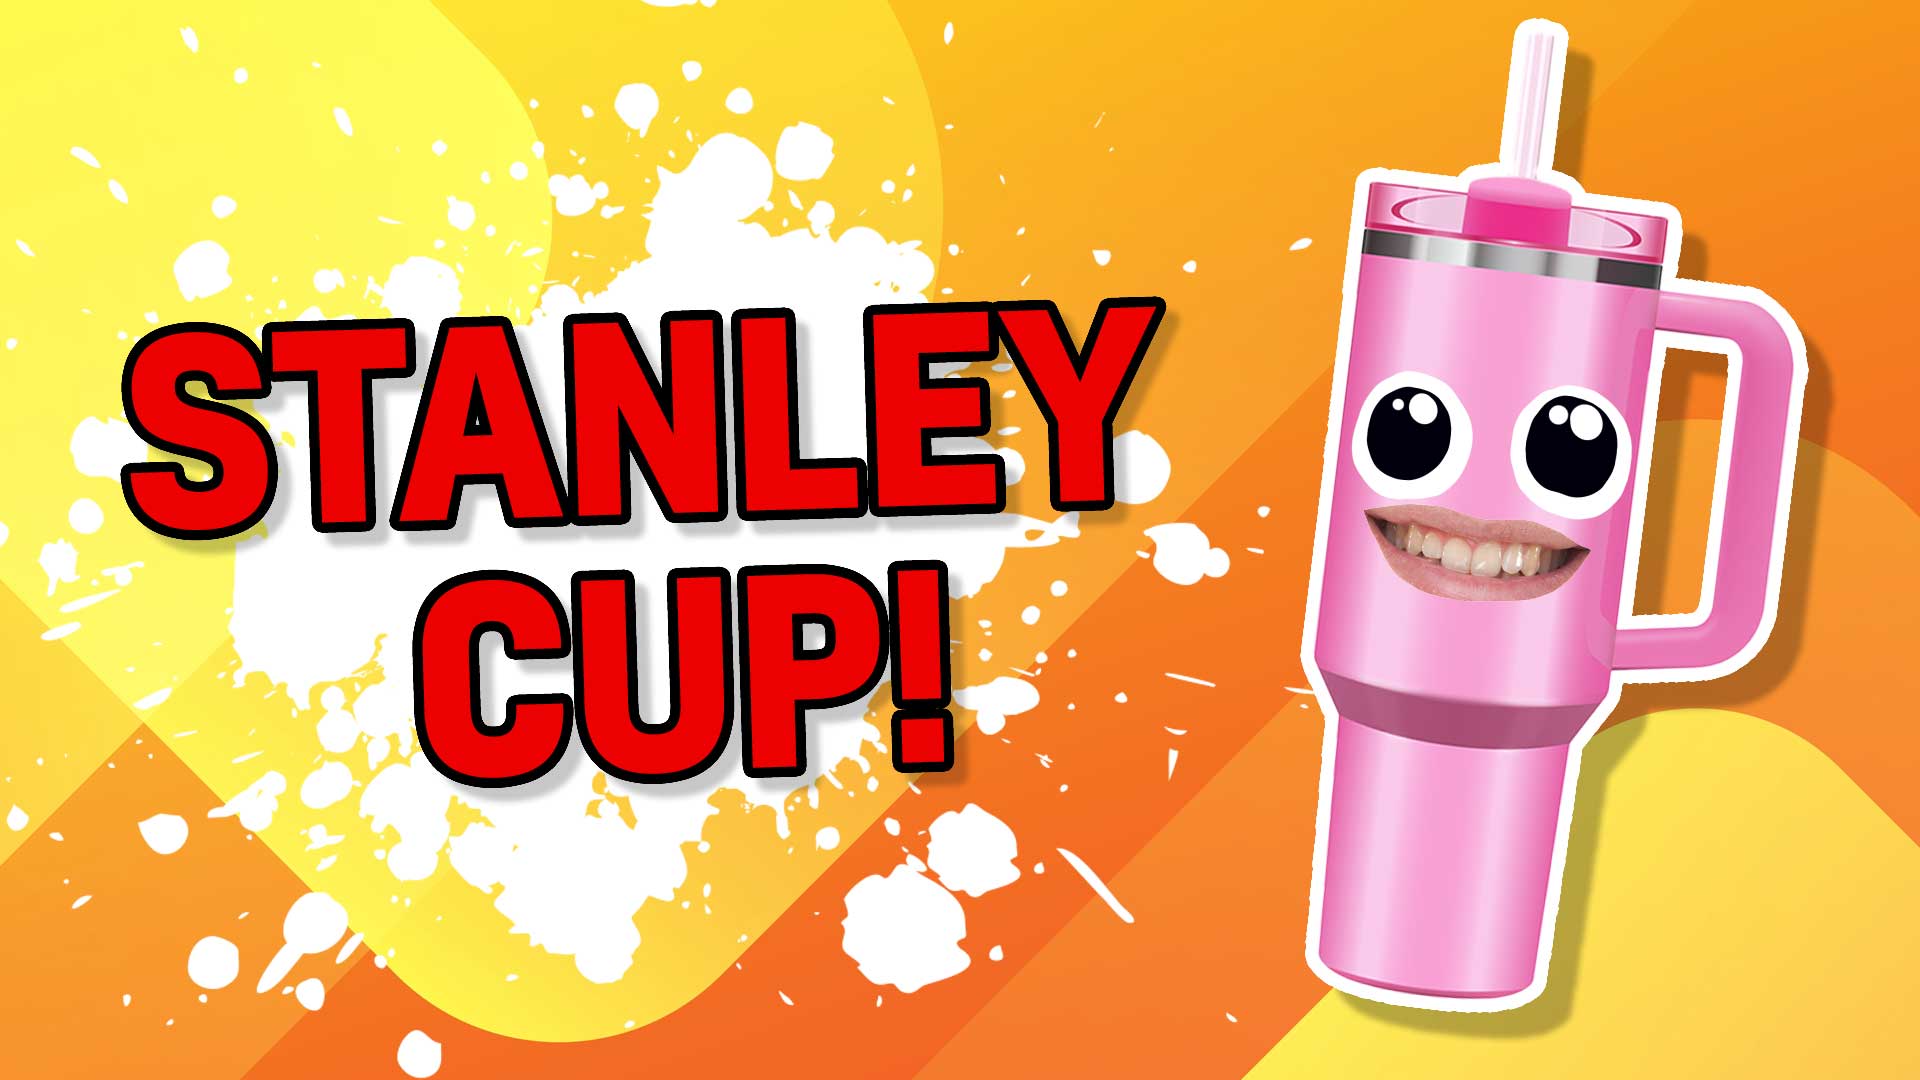 You are a Stanley Cup!